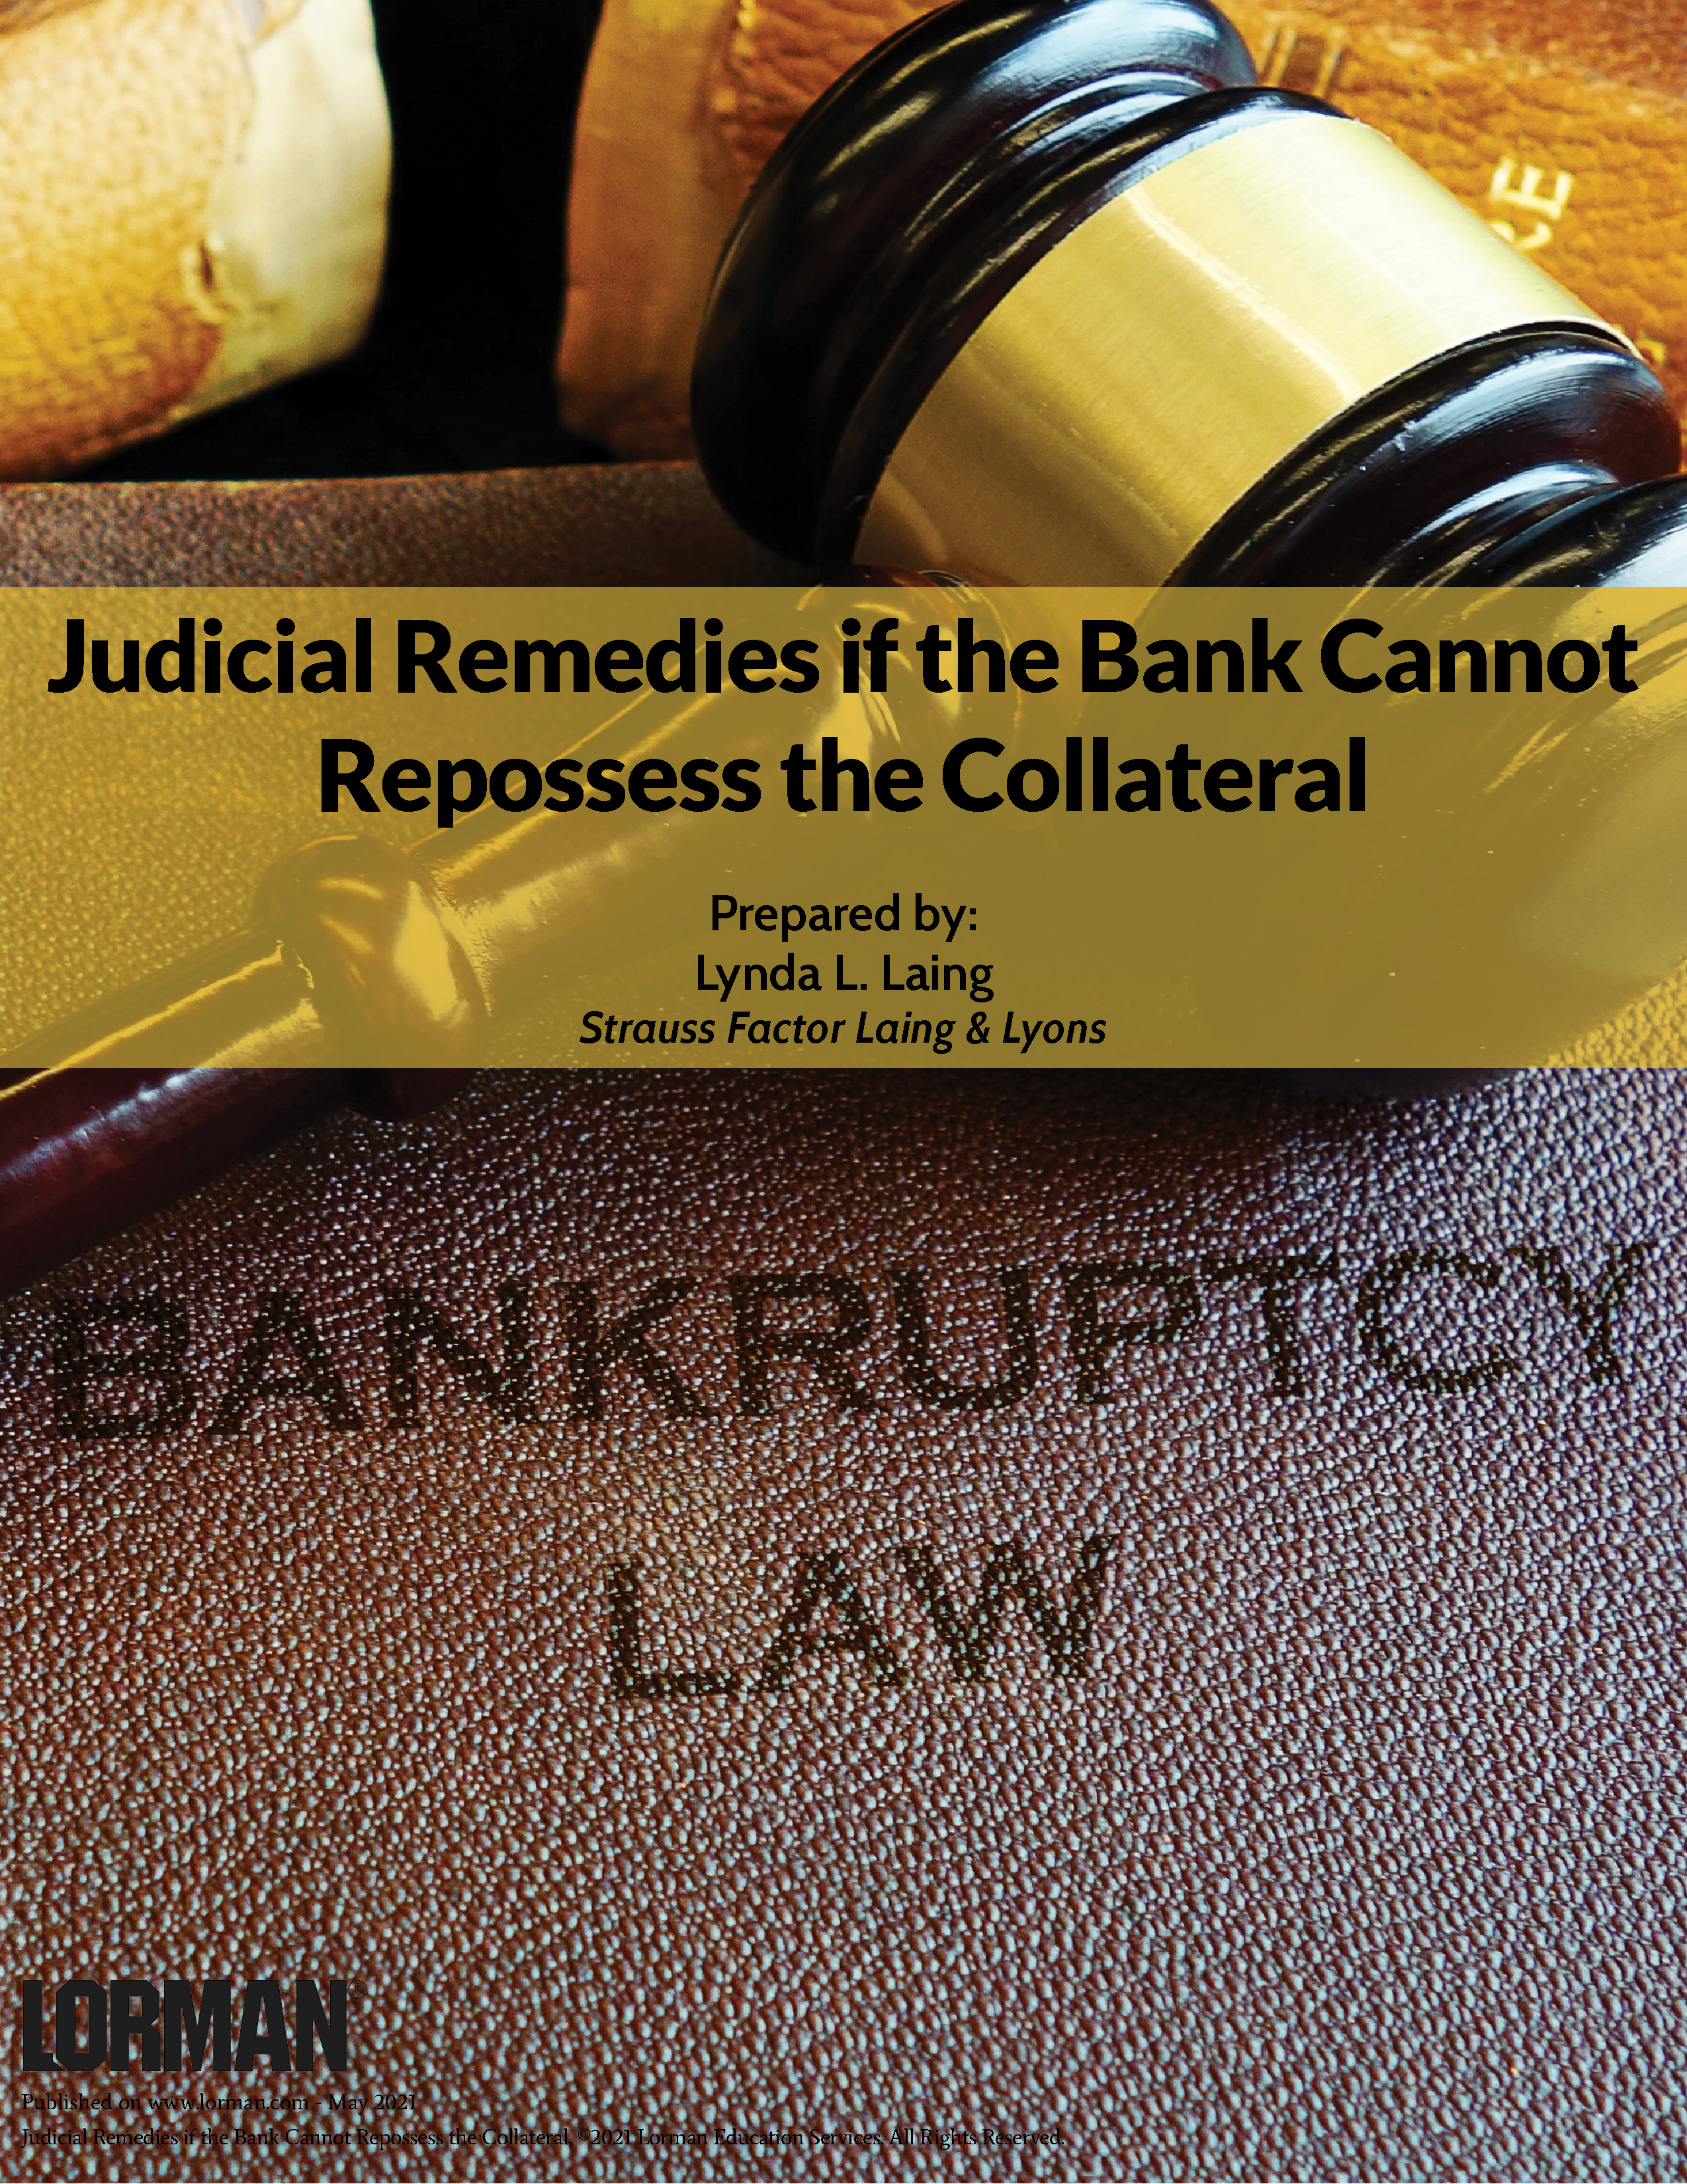 Judicial Remedies if the Bank Cannot Repossess the Collateral